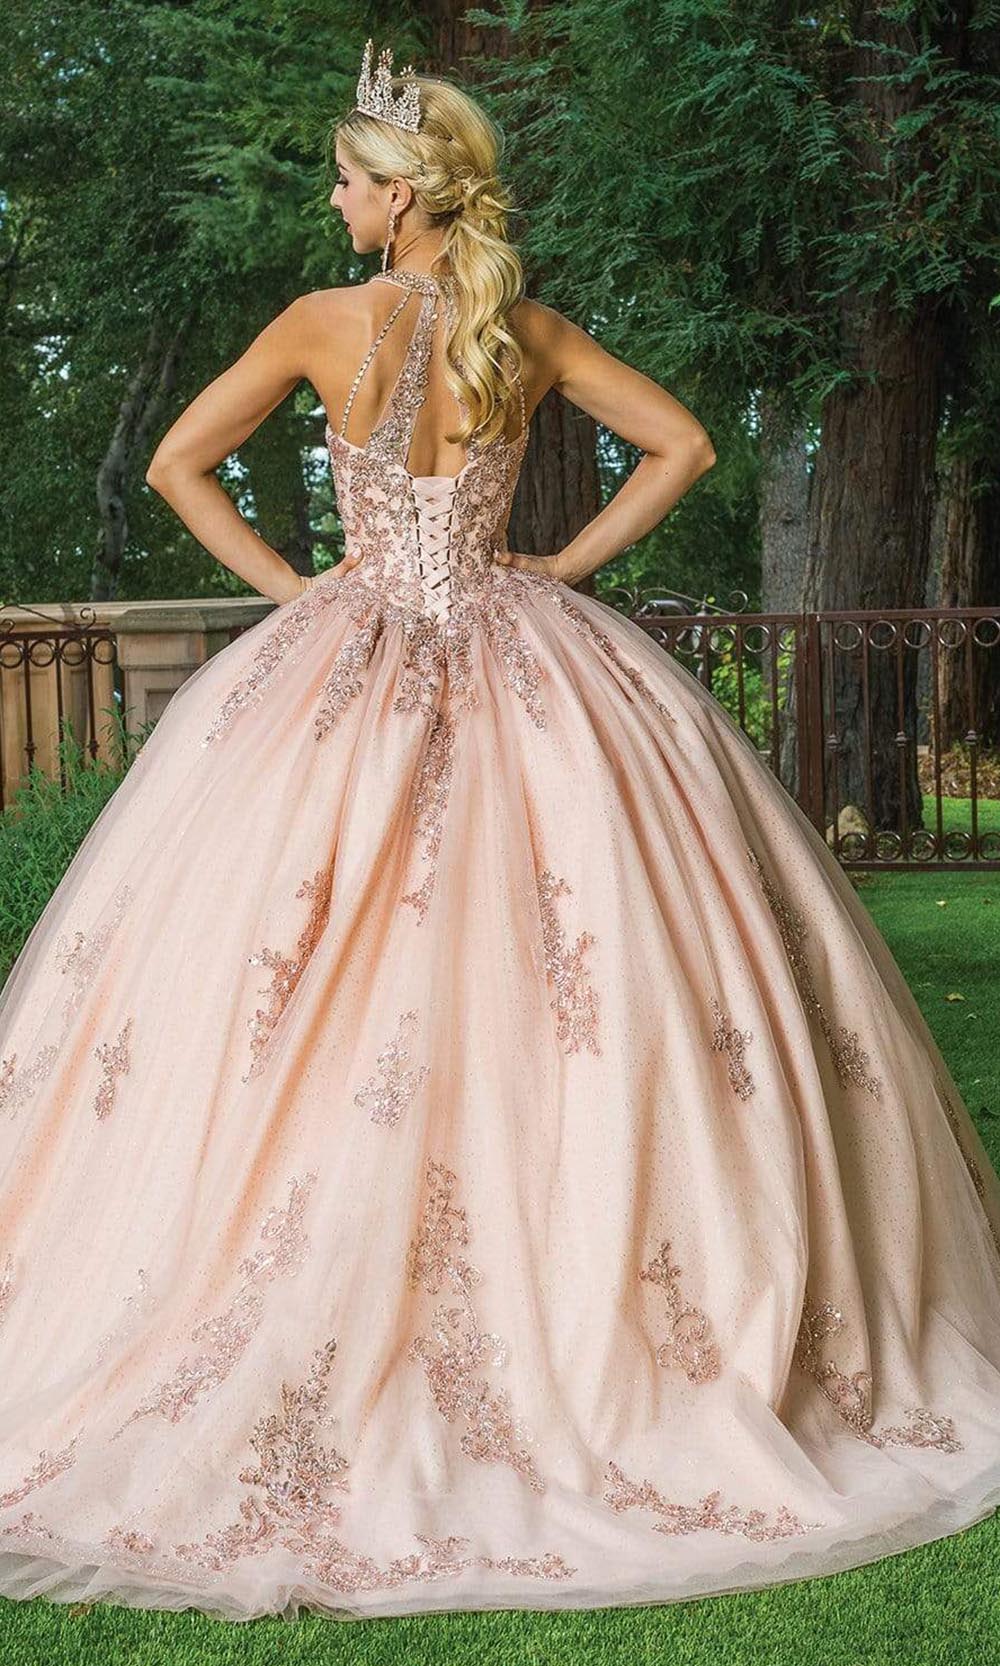 Dancing Queen - 1628 Halter Neck Embellished Ballgown Special Occasion Dress